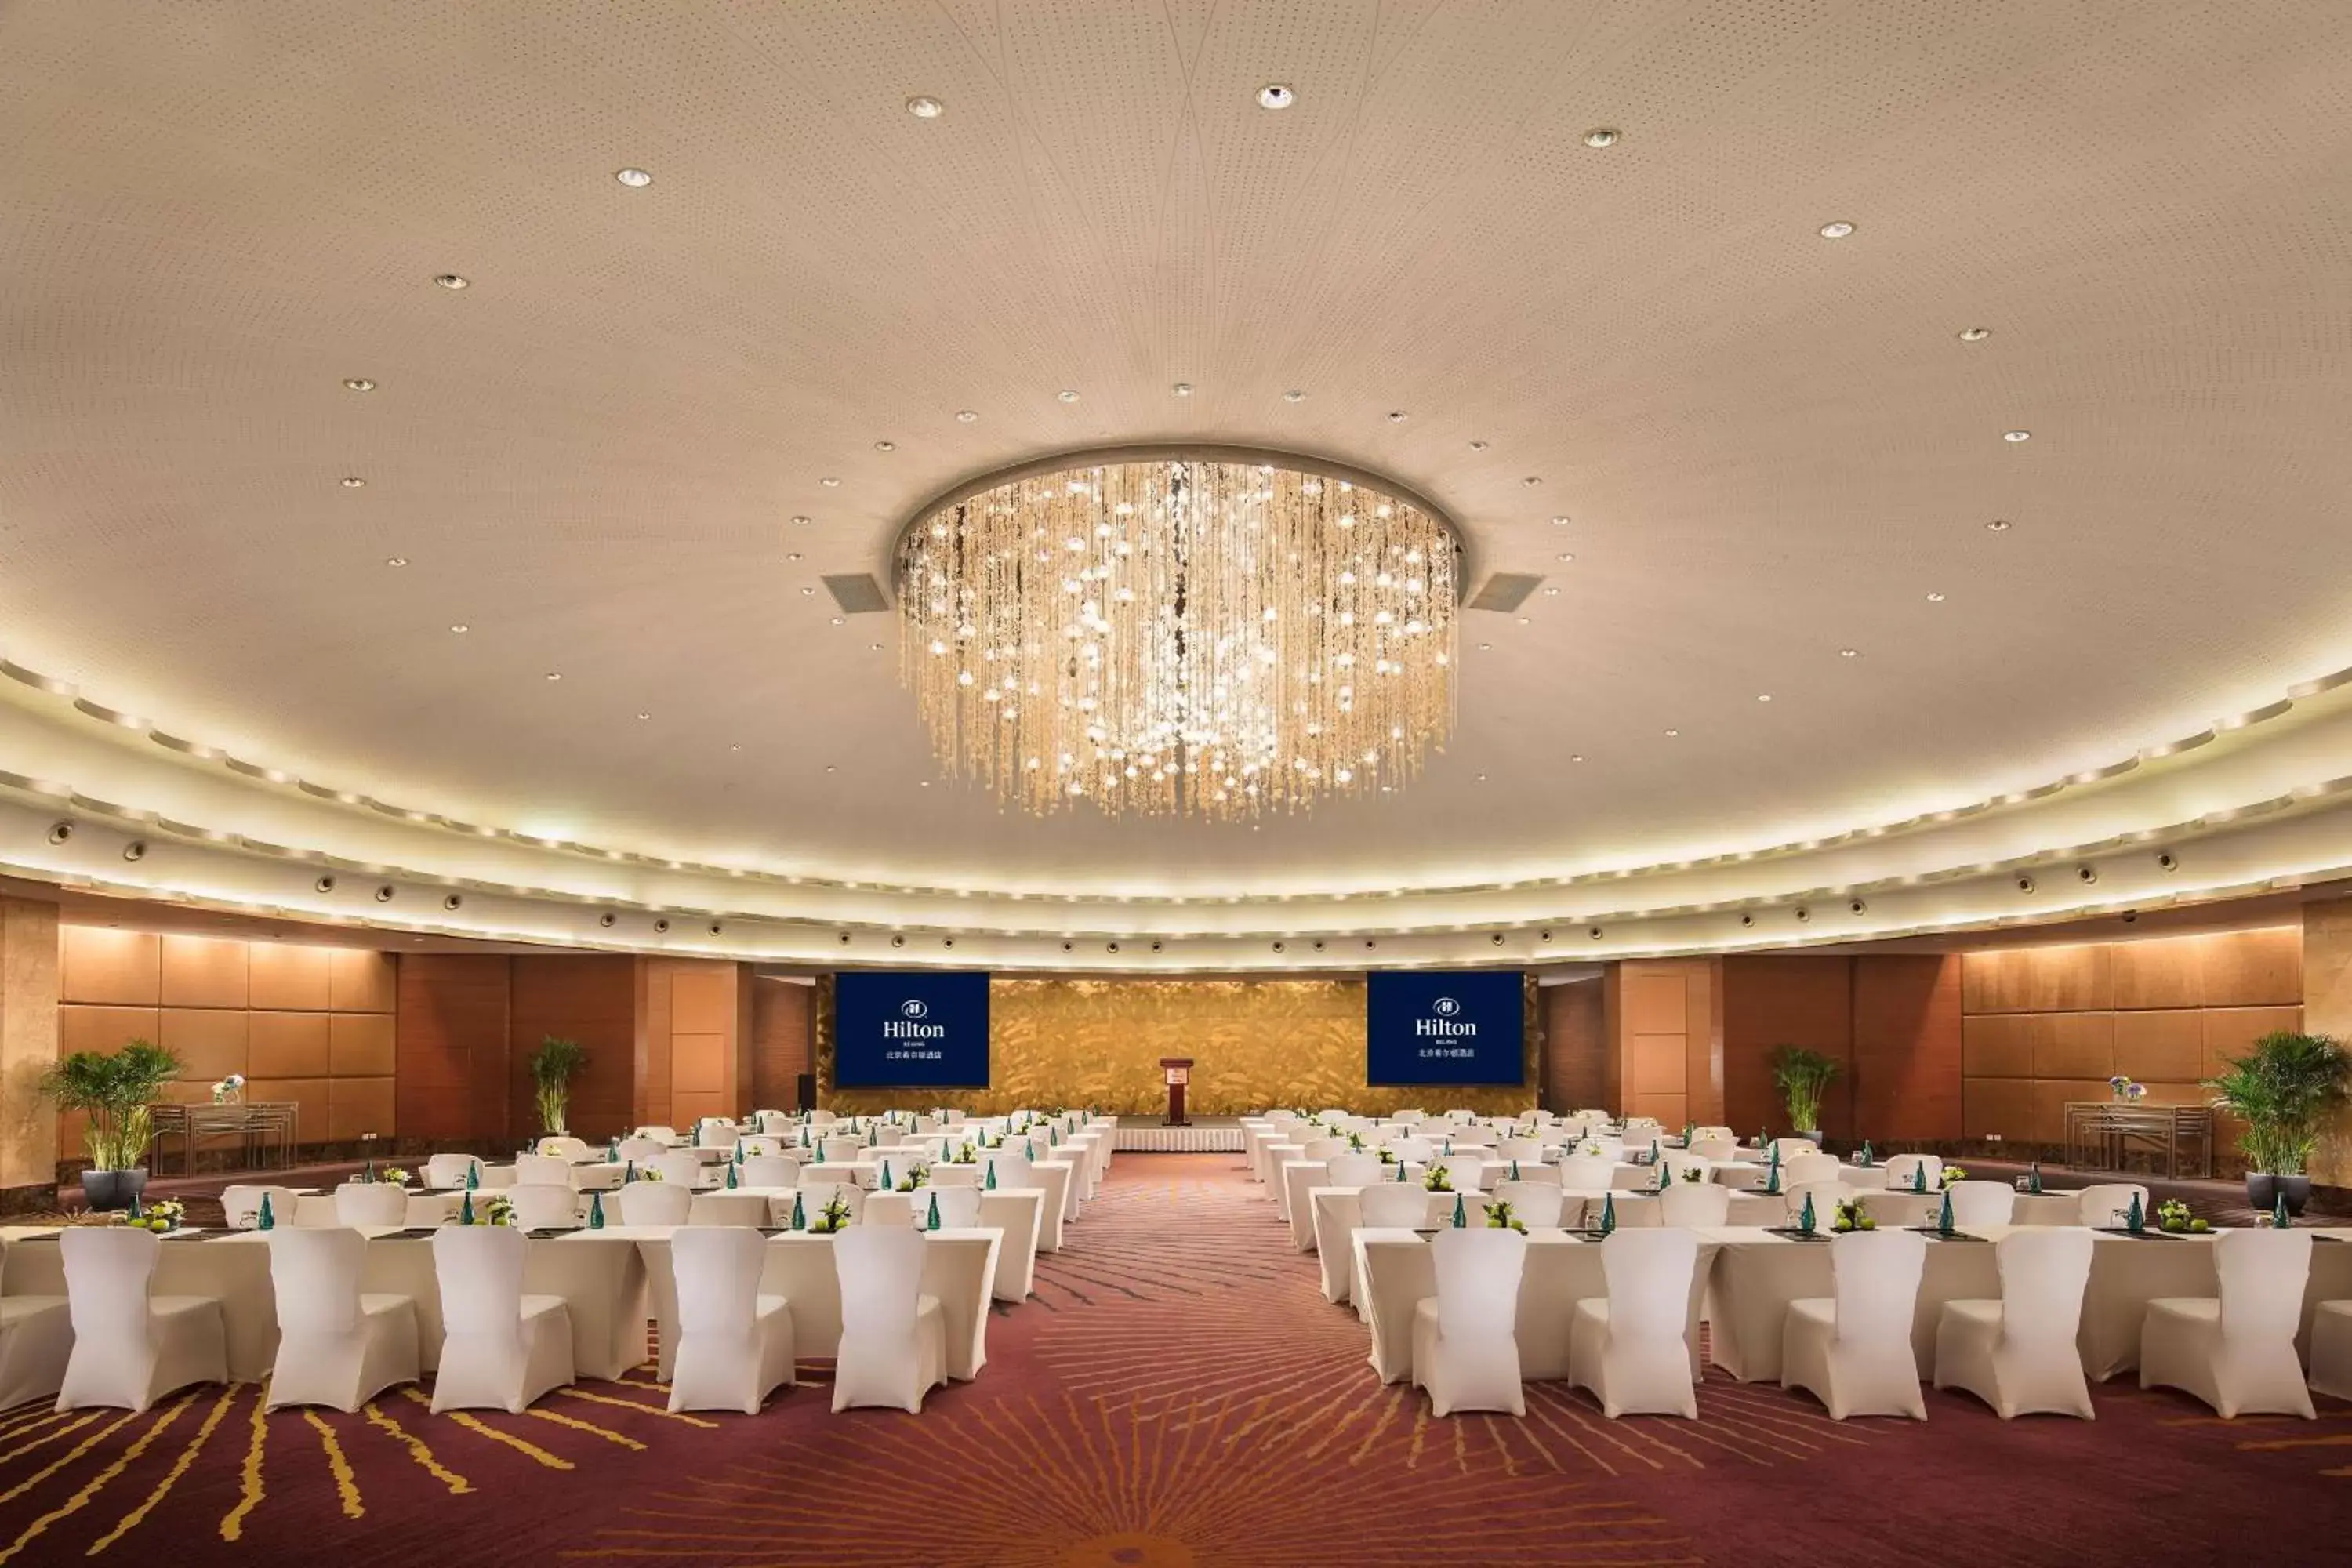 Meeting/conference room, Banquet Facilities in Hilton Beijing Hotel